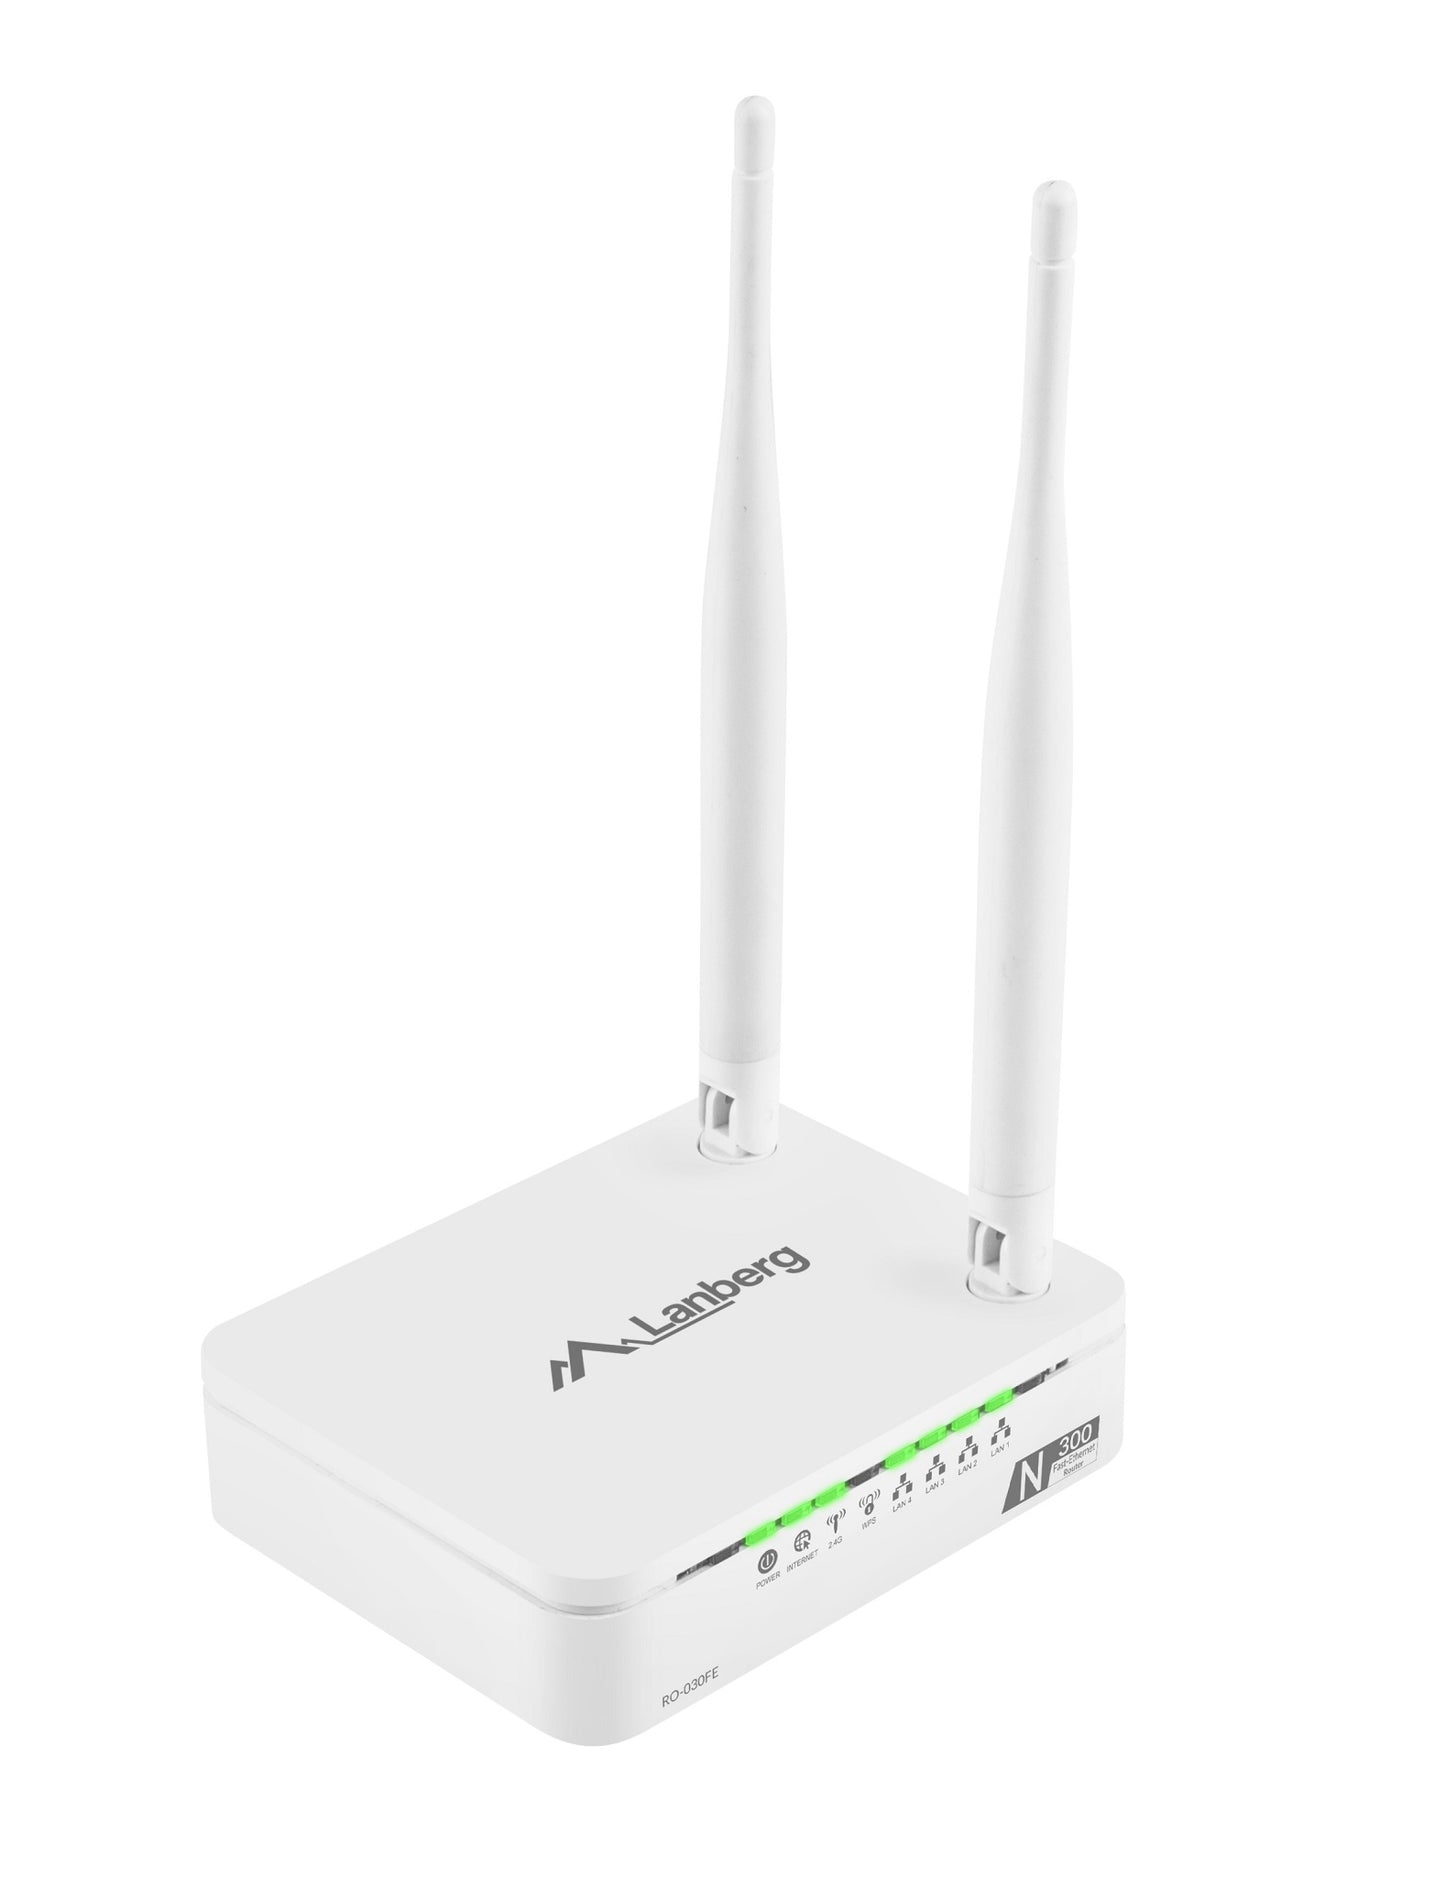 Lanberg RO-030FE 300Mbps Wireless N Router/Repeater